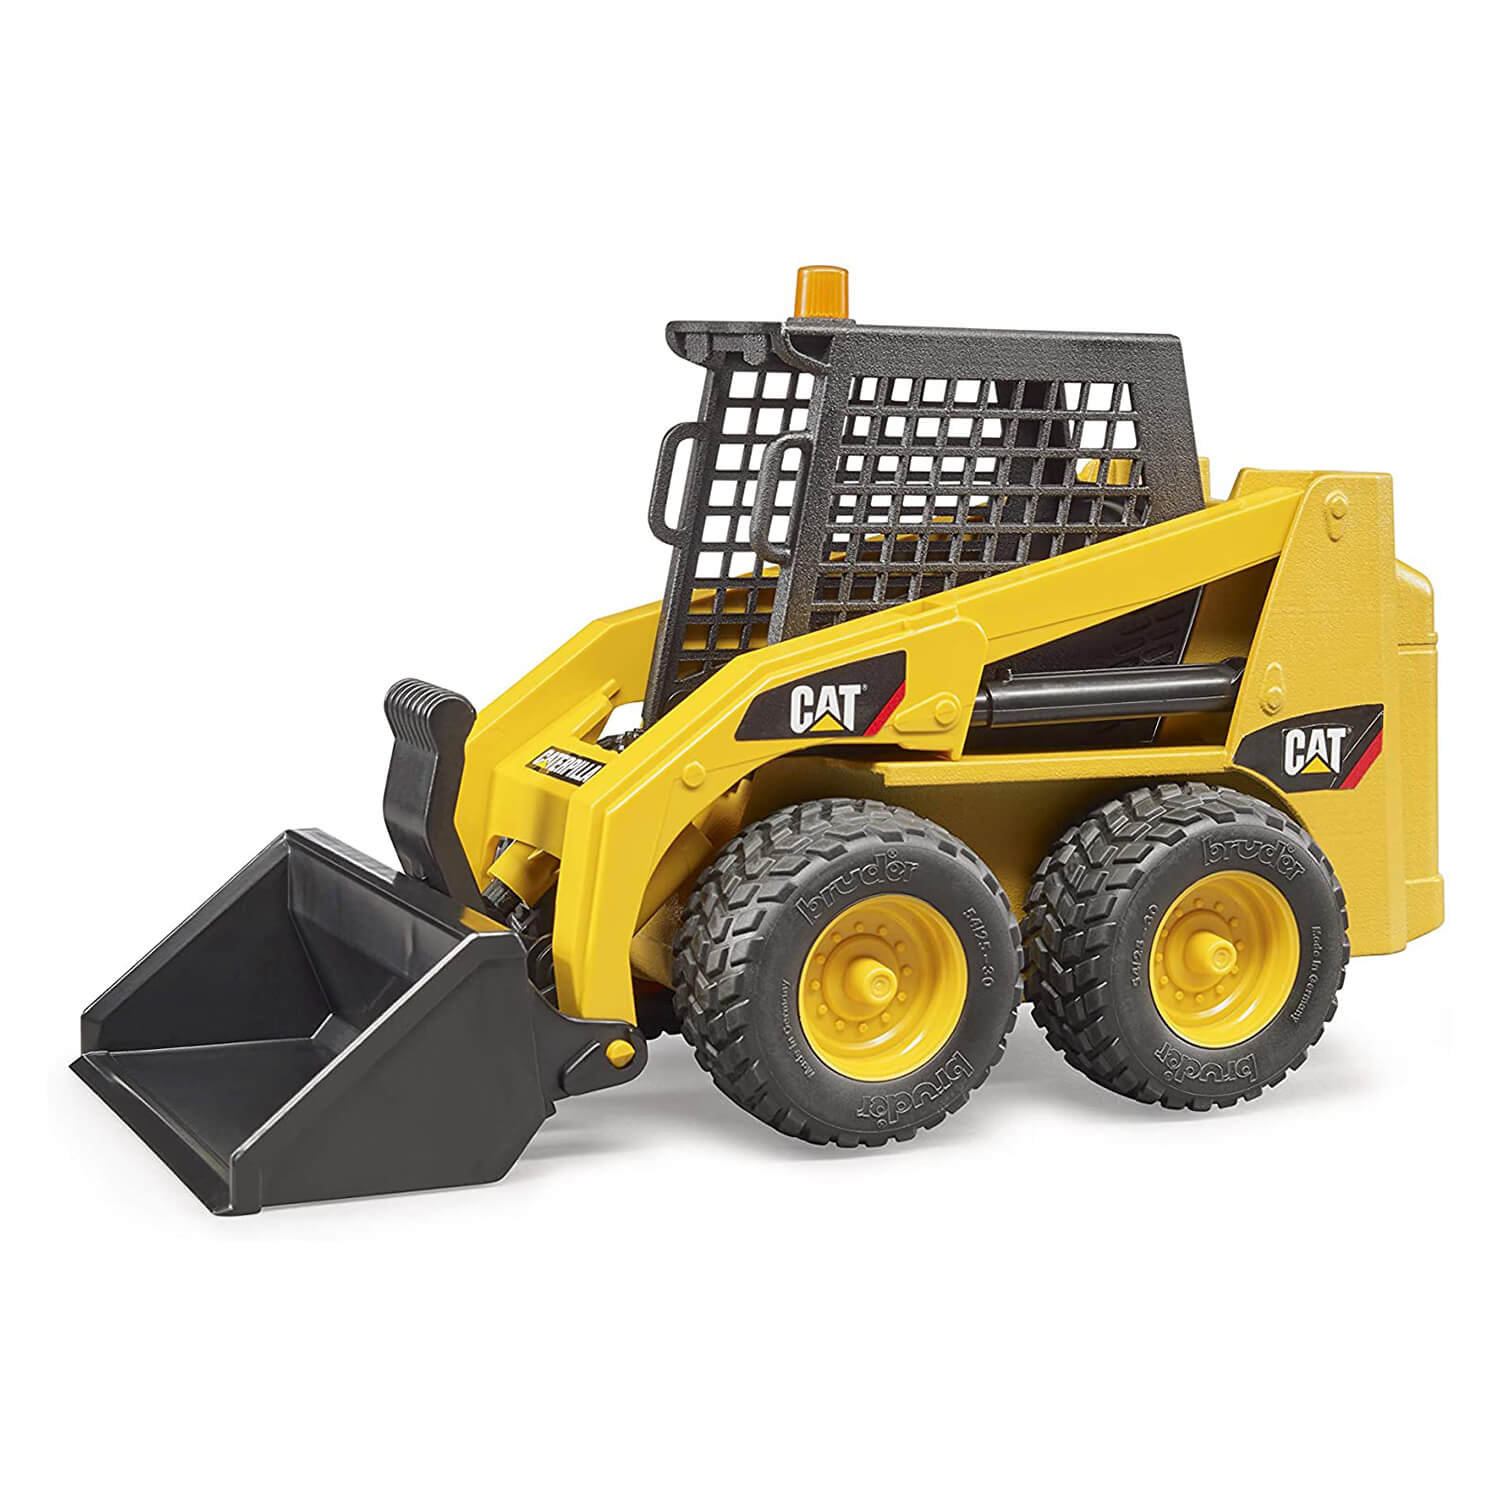 Bruder Pro Series Caterpillar Skid Steer Loader 1:16 Scale Vehicle from the side.